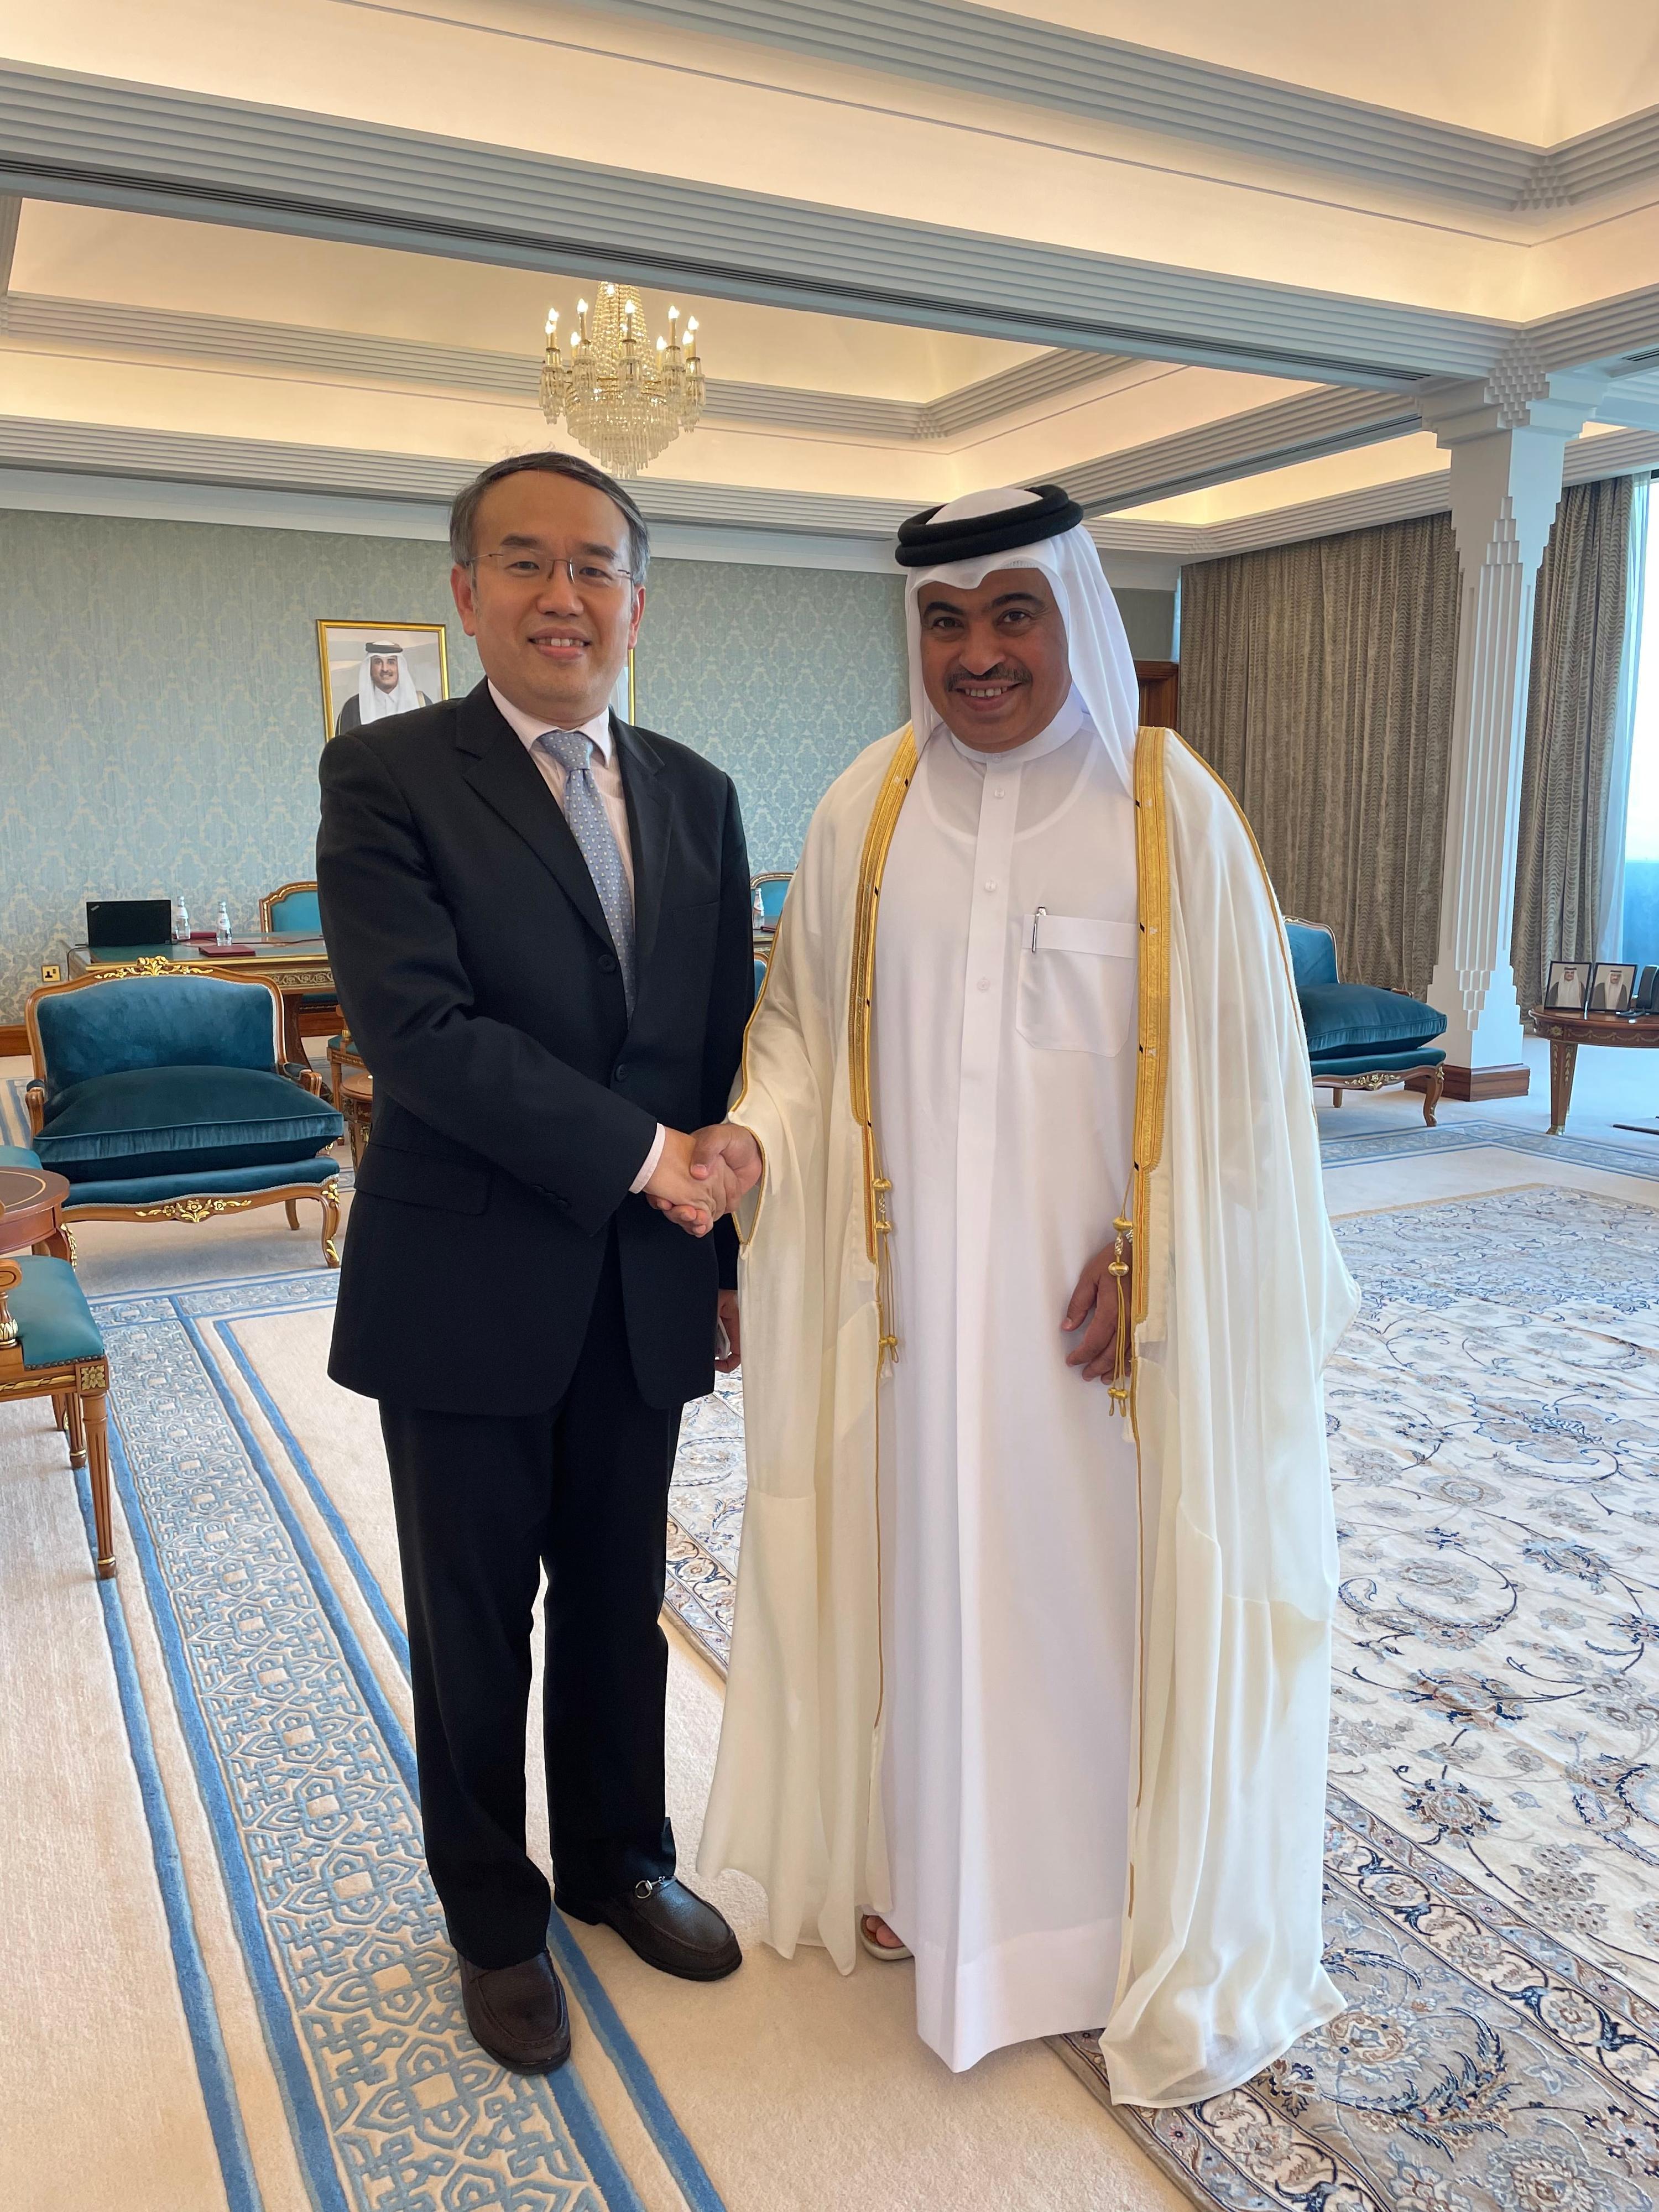 The Secretary for Financial Services and the Treasury, Mr Christopher Hui, continued his visit to Qatar. Photo shows Mr Hui (left) meeting with the Minister of Finance of Qatar, Mr Ali bin Ahmed Al Kuwari (right), in Doha today (September 21).